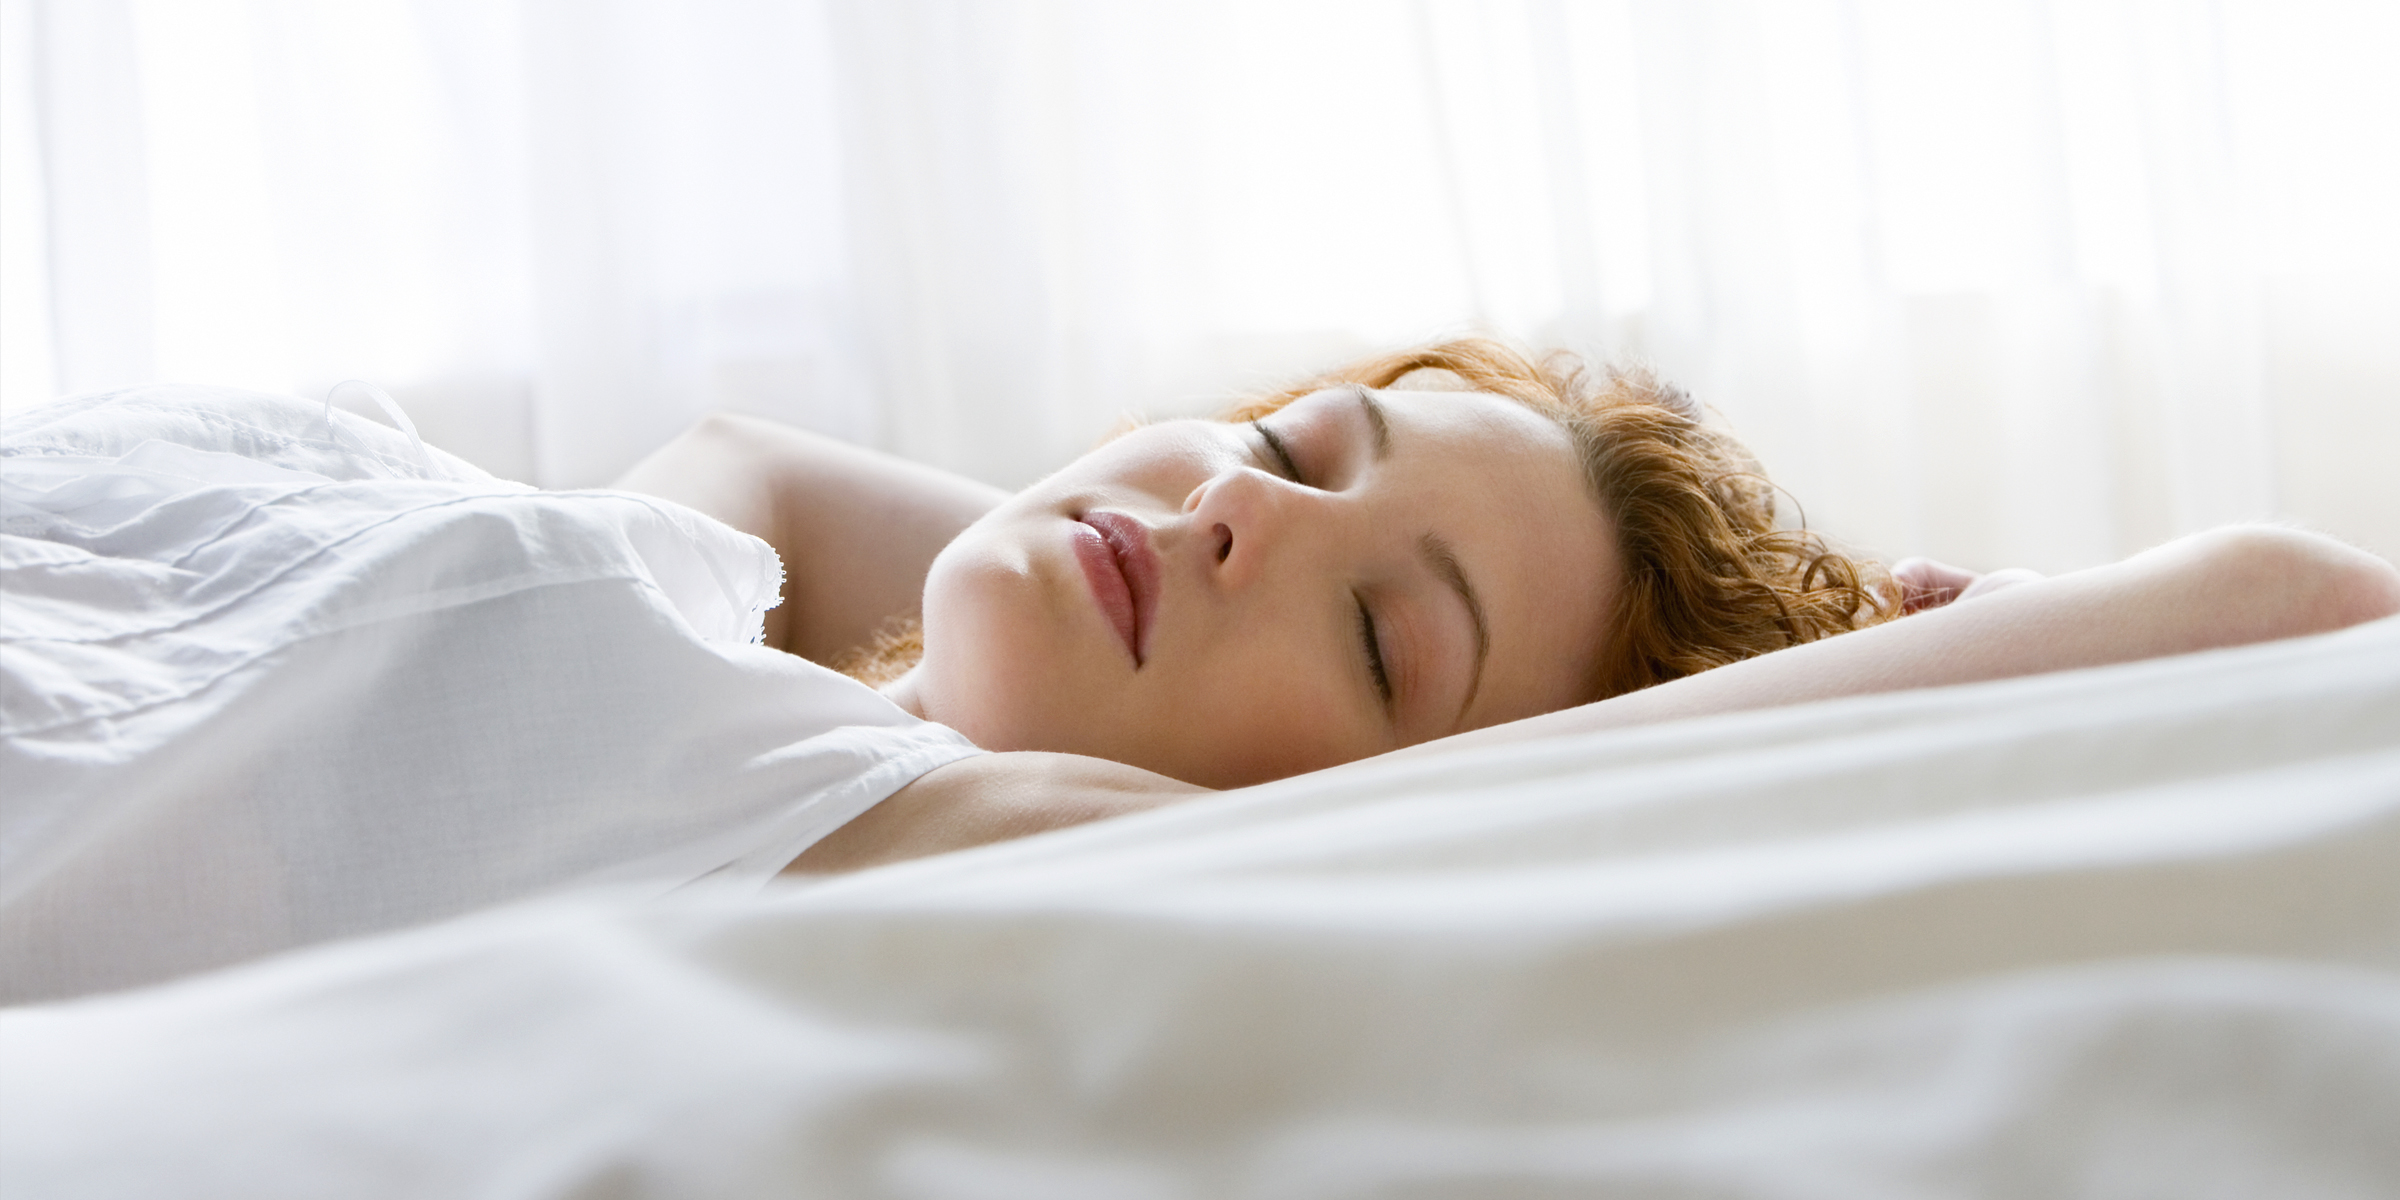 A beautiful young woman, bathed in soft light, sleeping peacefully | Source: Getty Images